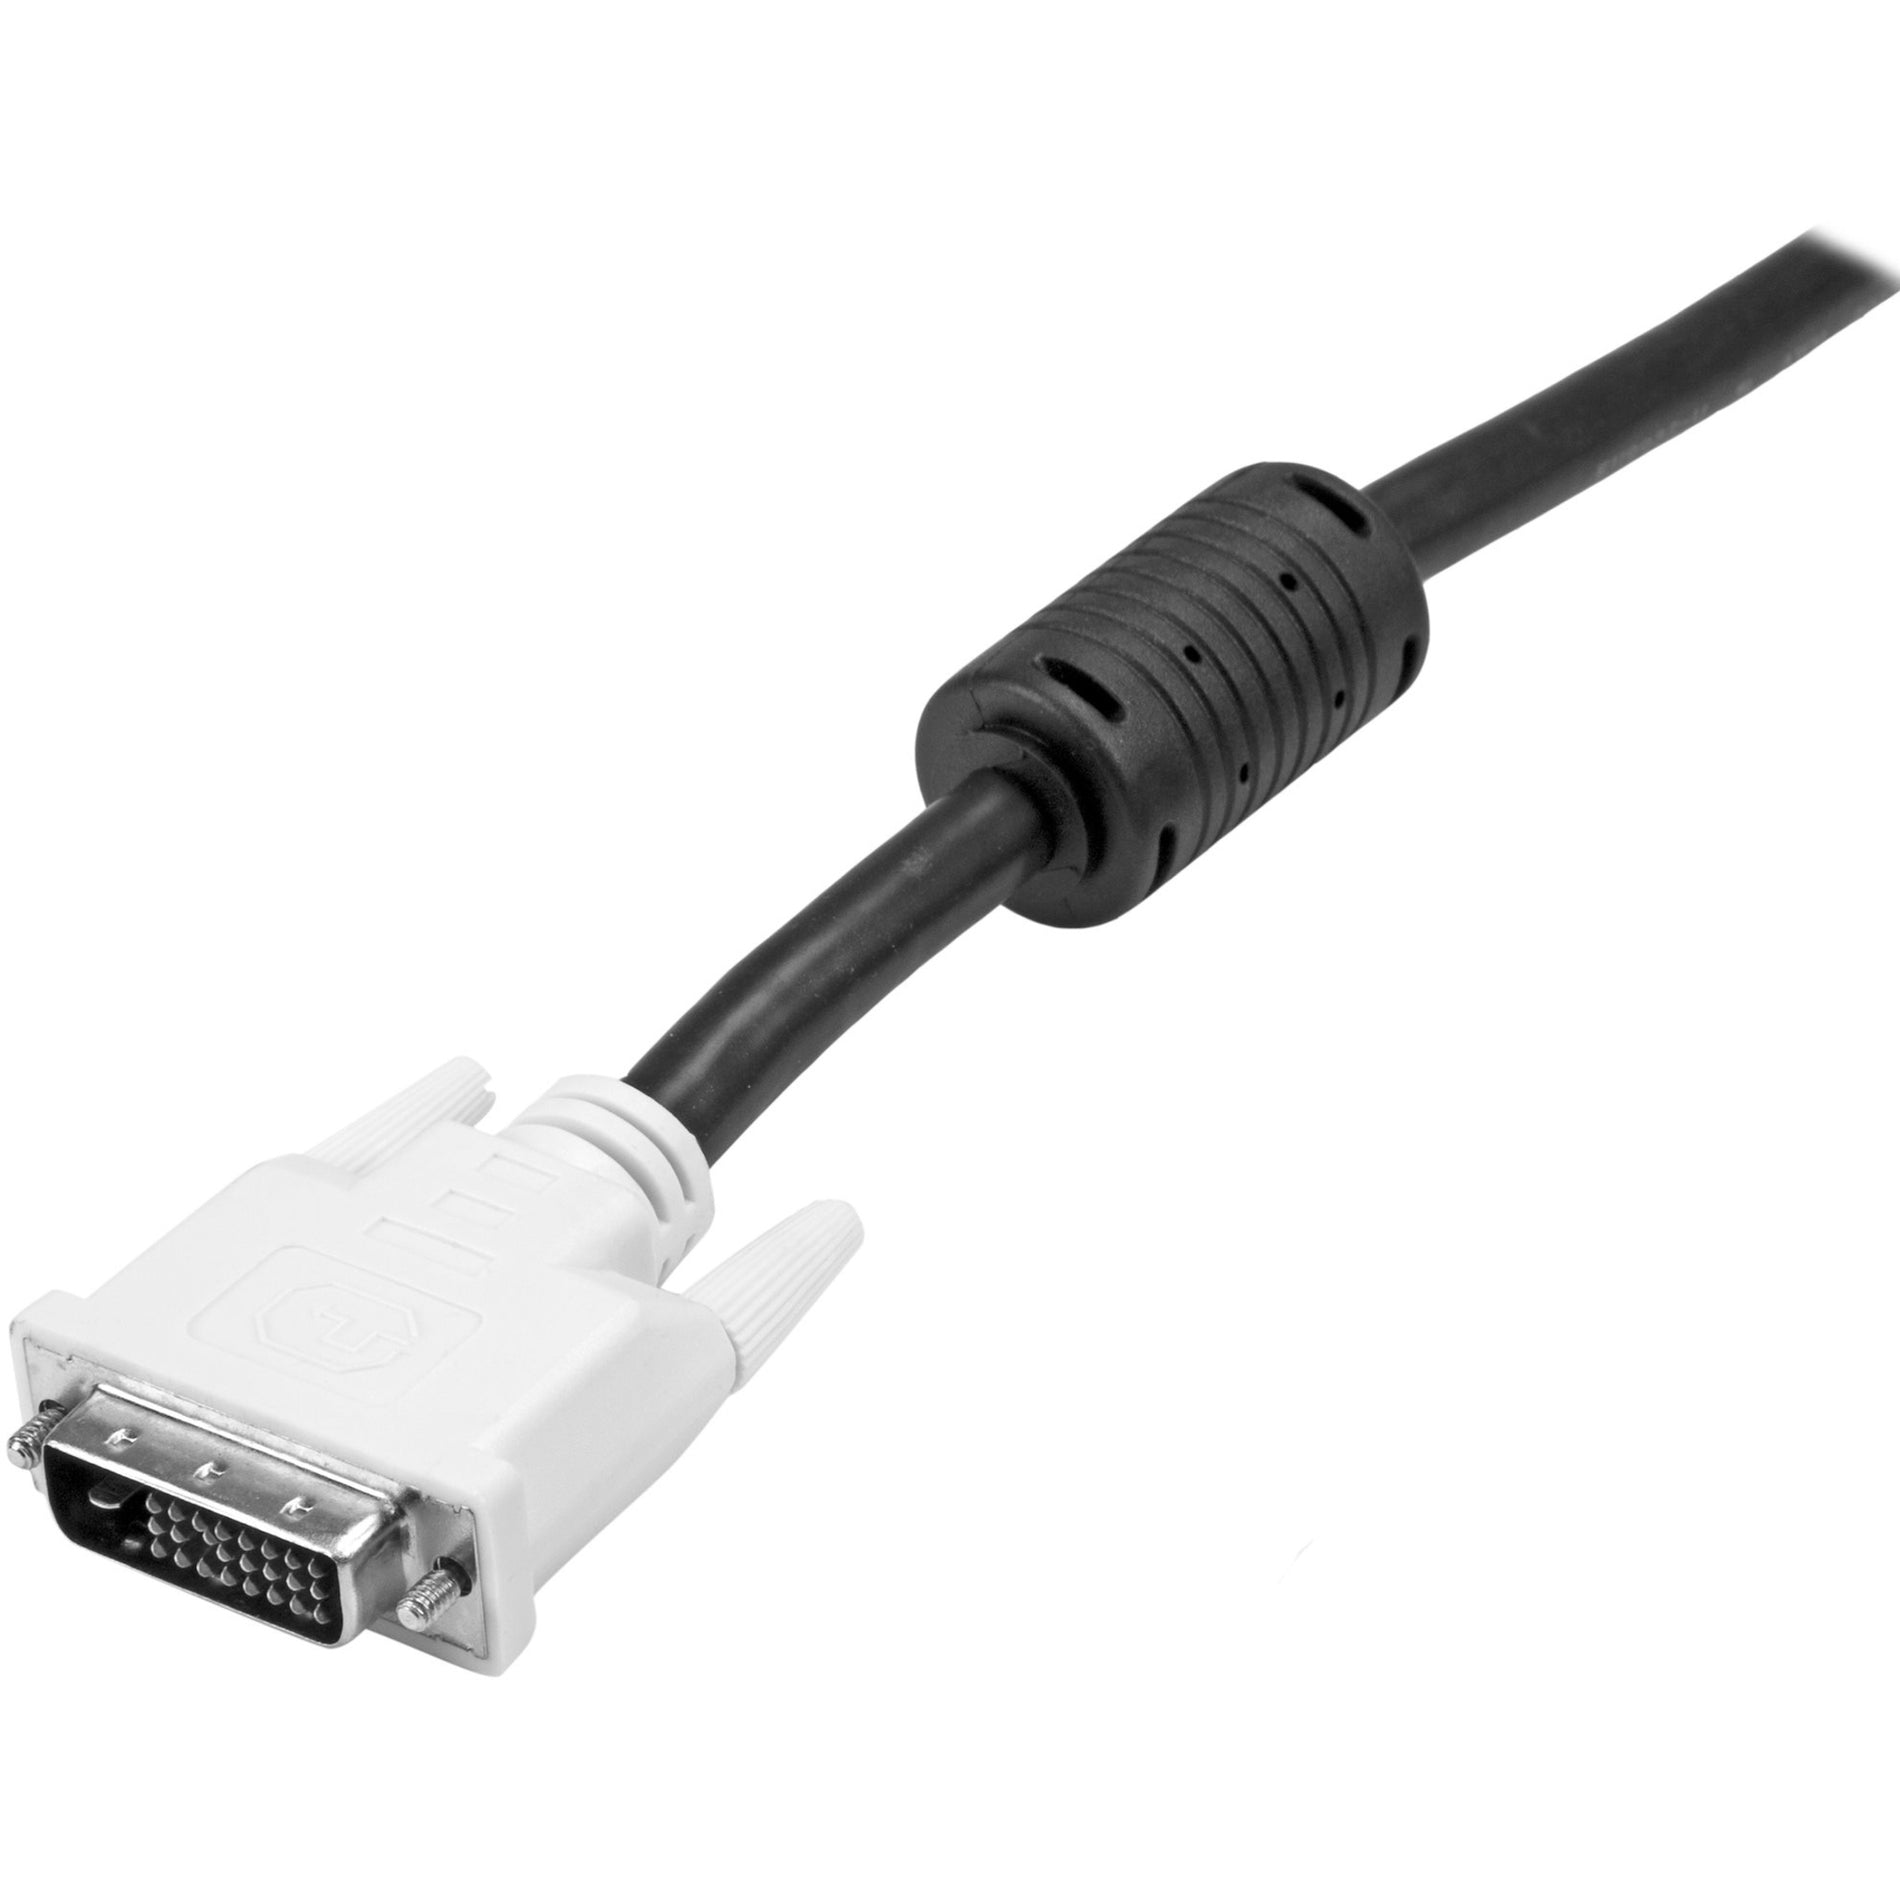 StarTech.com DVIDDMM15 15 ft DVI-D Dual Link Cable - M/M, High-Speed Video Cable for Displays, Projectors, and HDTVs